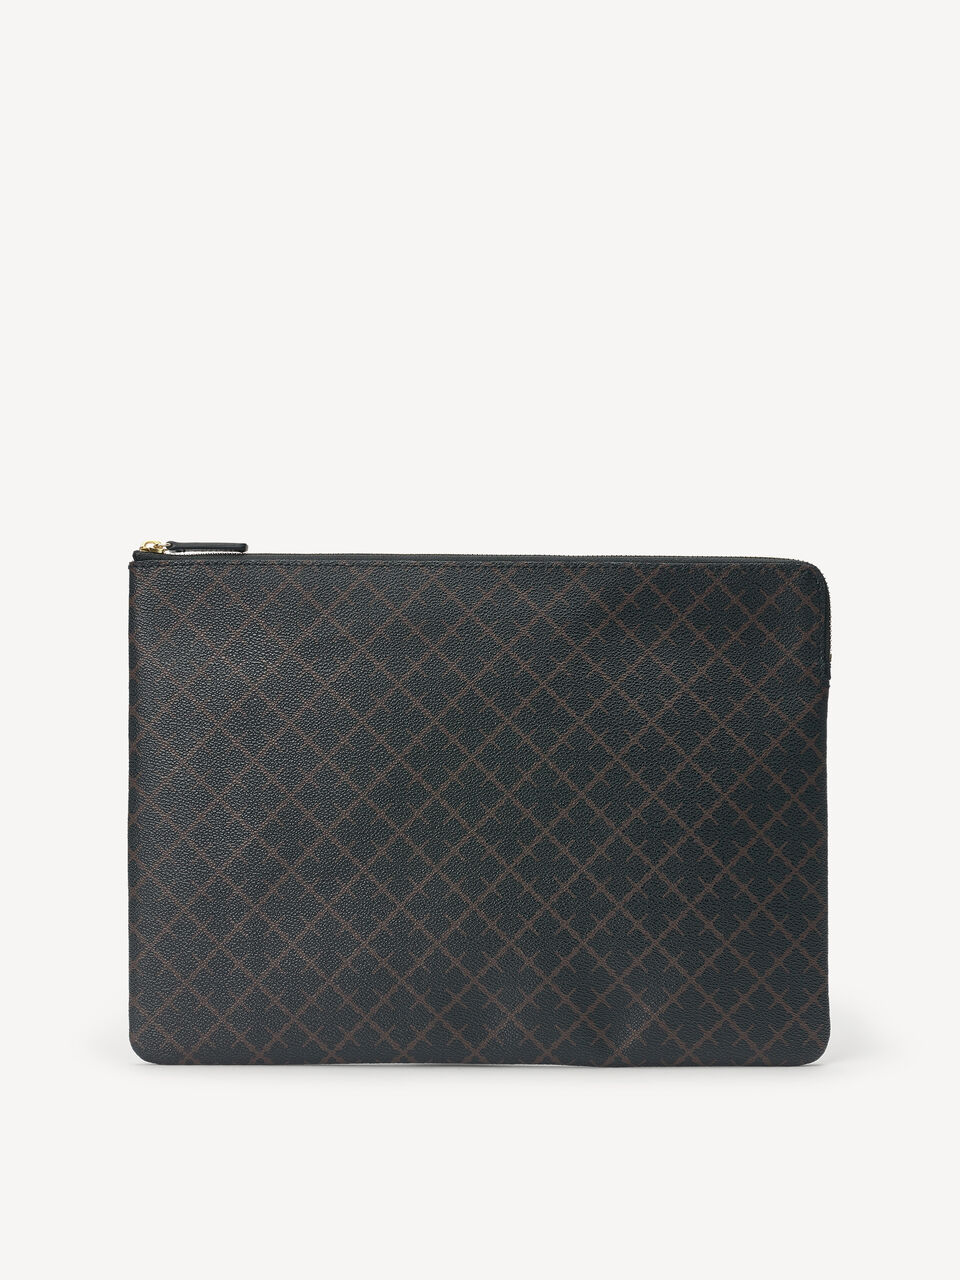 laptop case - iPhone and computer online